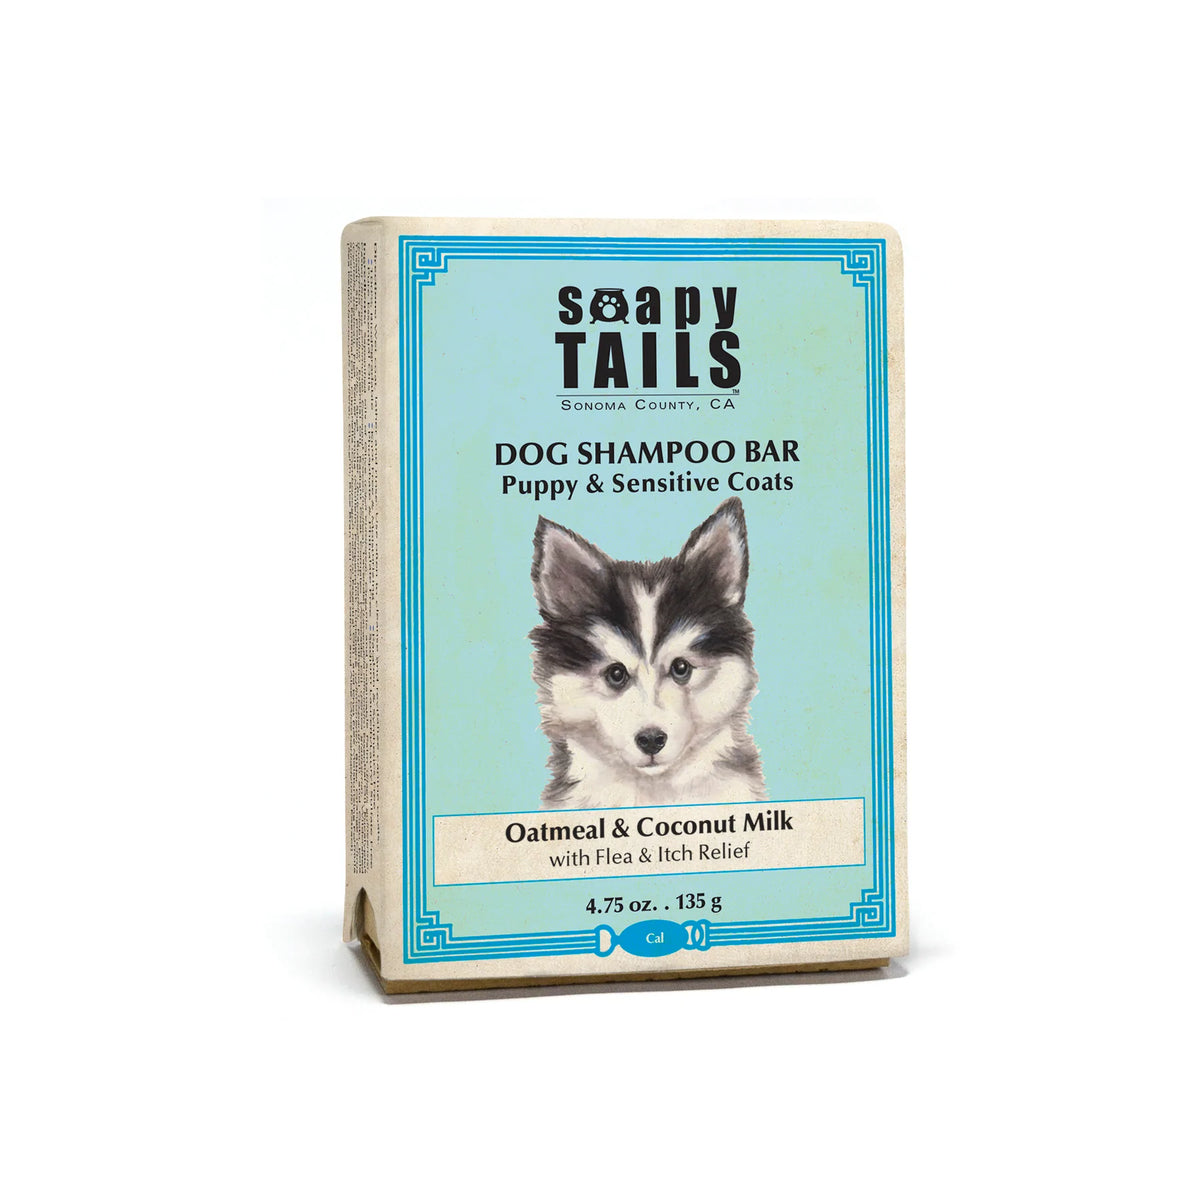 Packaging of the "Soapy Tails Shampoo Bar - Unscented Oatmeal & Coconut Milk- Fine Puppy & Sensitive Coats" by Three Sisters Apothecary featuring an image of a puppy on a teal background, with text detailing the product as suitable for puppies with sensitive coats and including oatmeal coconut milk.